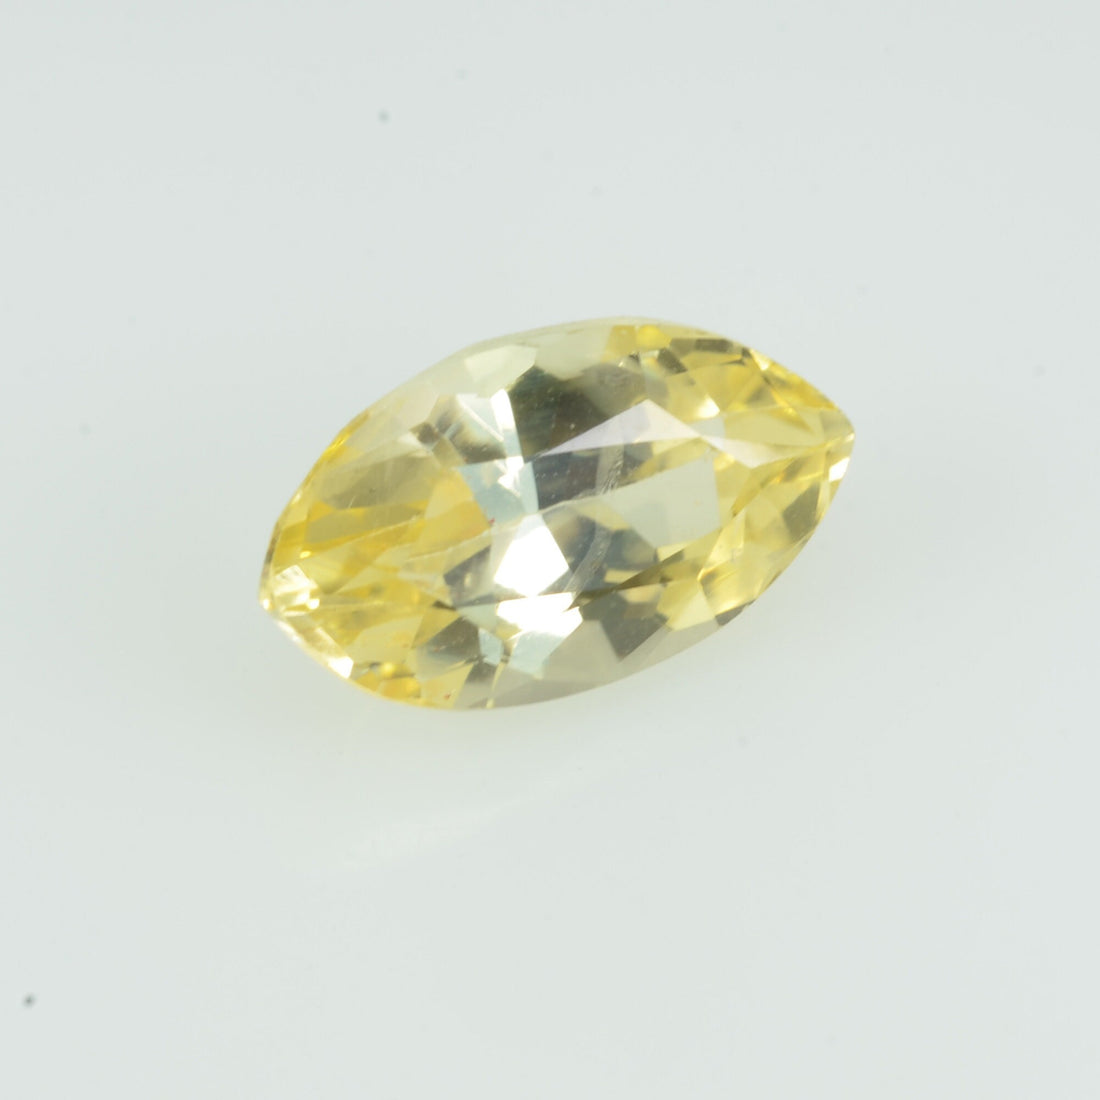 0.97 cts Natural Yellow Sapphire Loose Gemstone Marquise Cut